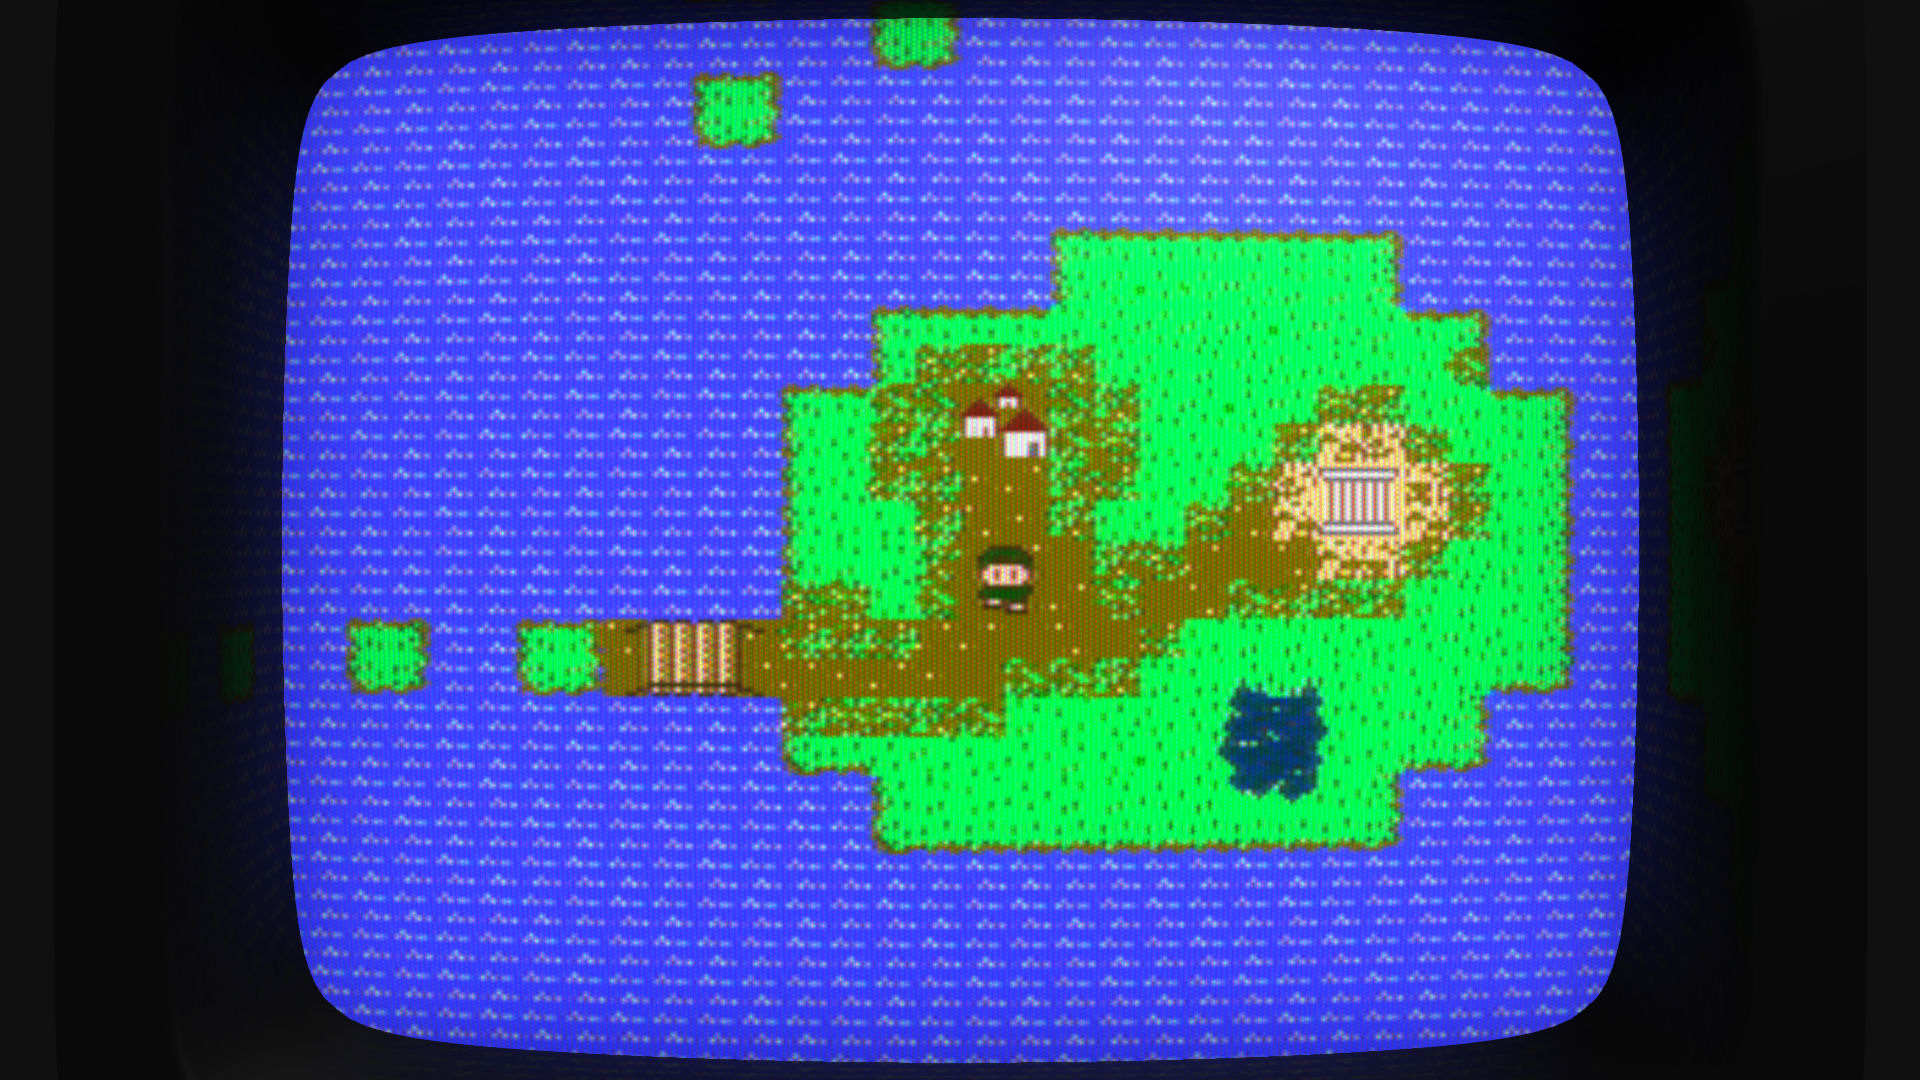 World map navigation is reminiscent of Super Mario Bros 3